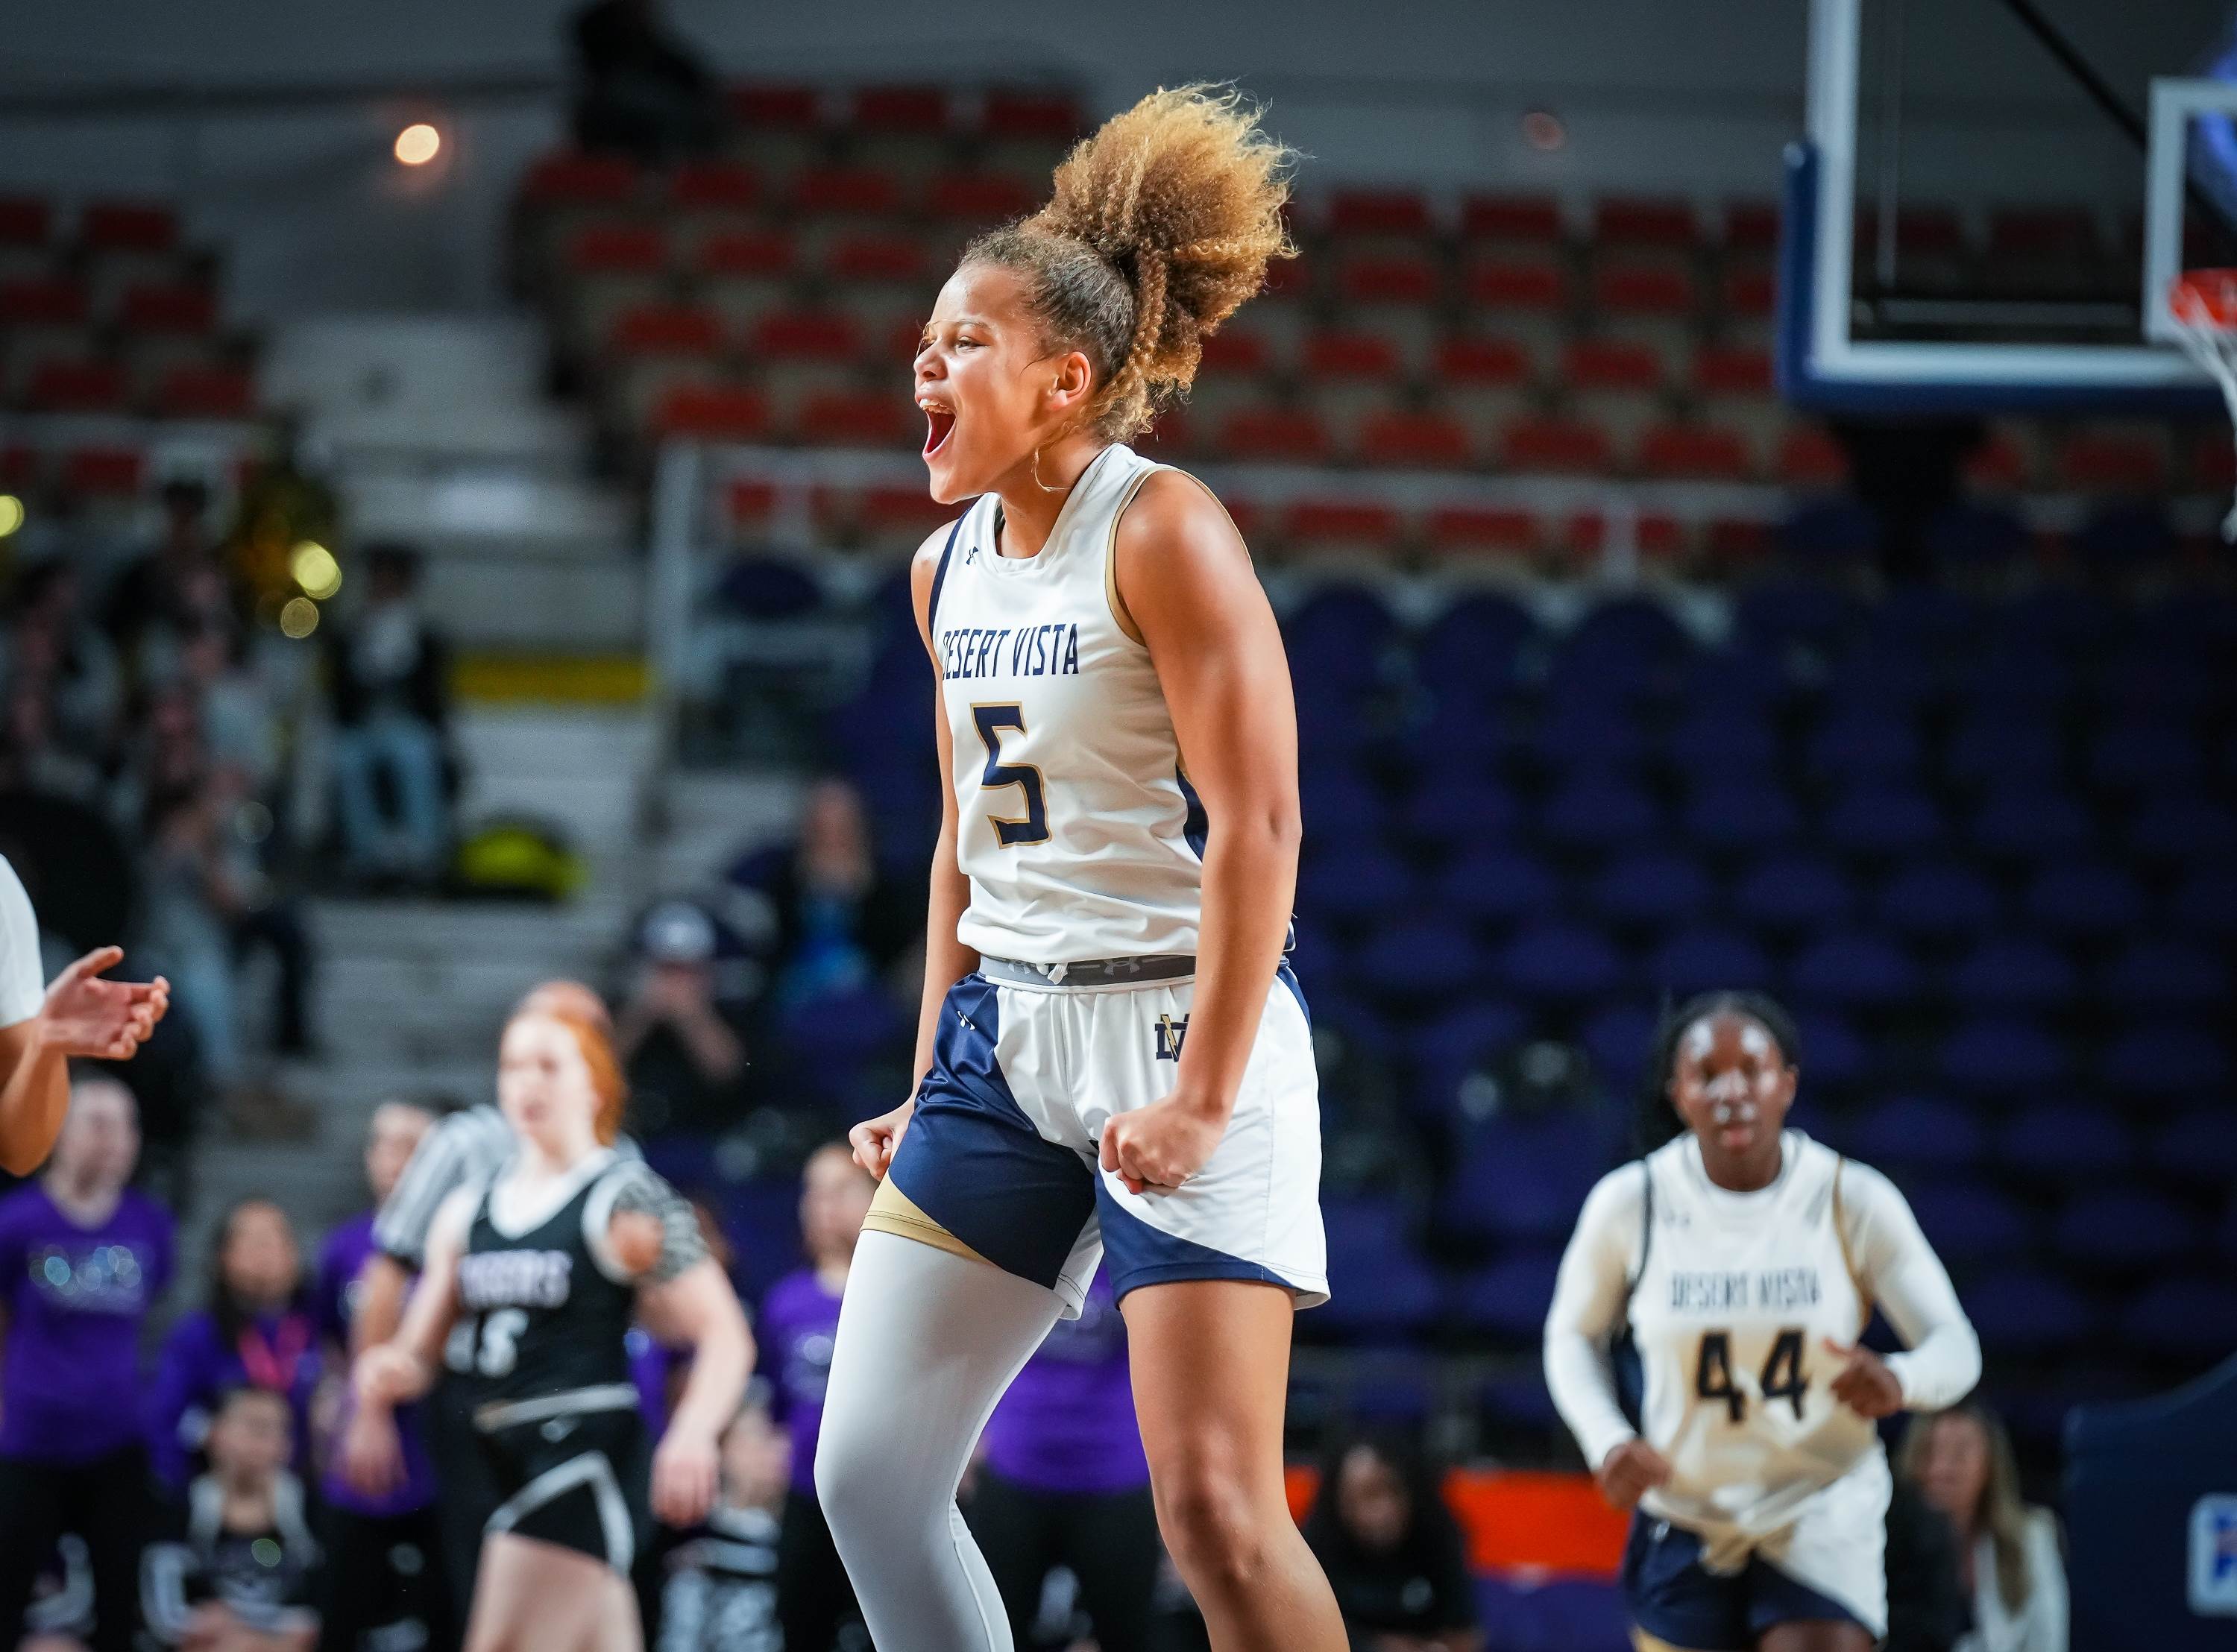 Jerzy Robinson of Desert Vista is one of 24 MaxPreps All-Americans invited to the USA Basketball U16 training camp. She headlines the 55-girl field along with MaxPreps Co-Freshman of the Year McKenna Woliczko of Archbishop Mitty. (Photo: Steven Davis)